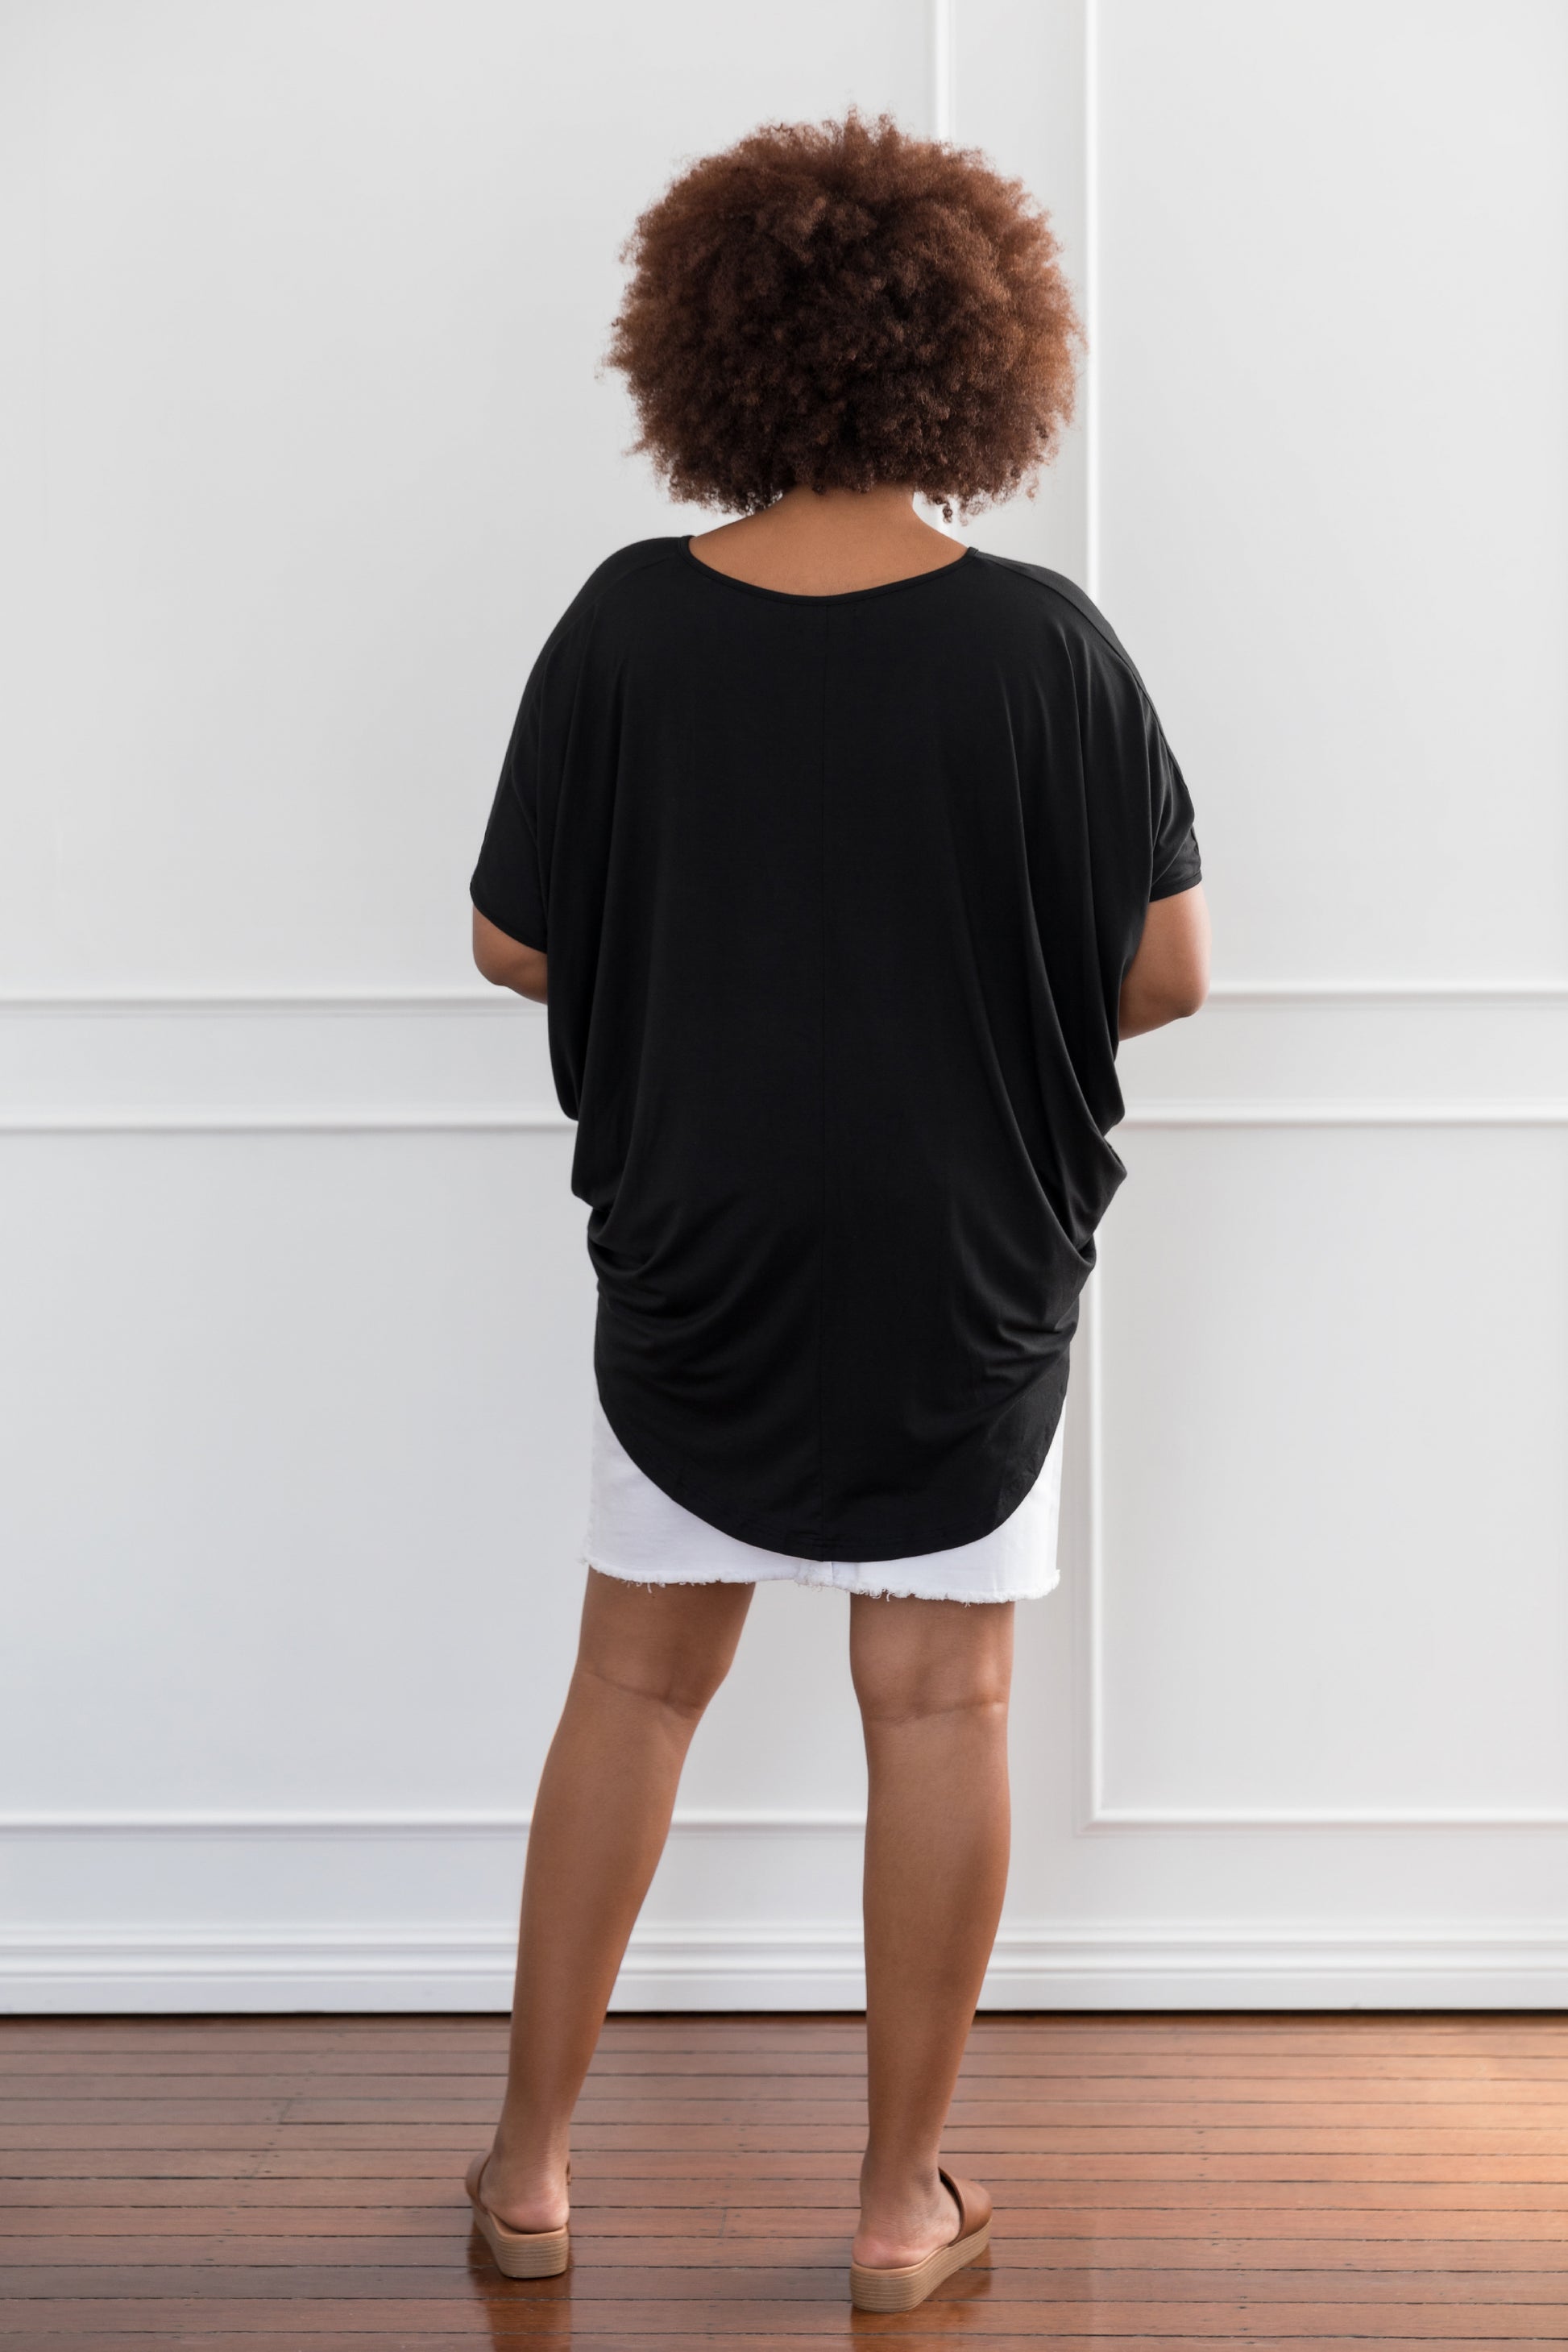 Plus-Sized Black Tops| PQ Collection | Hi Low Miracle Top